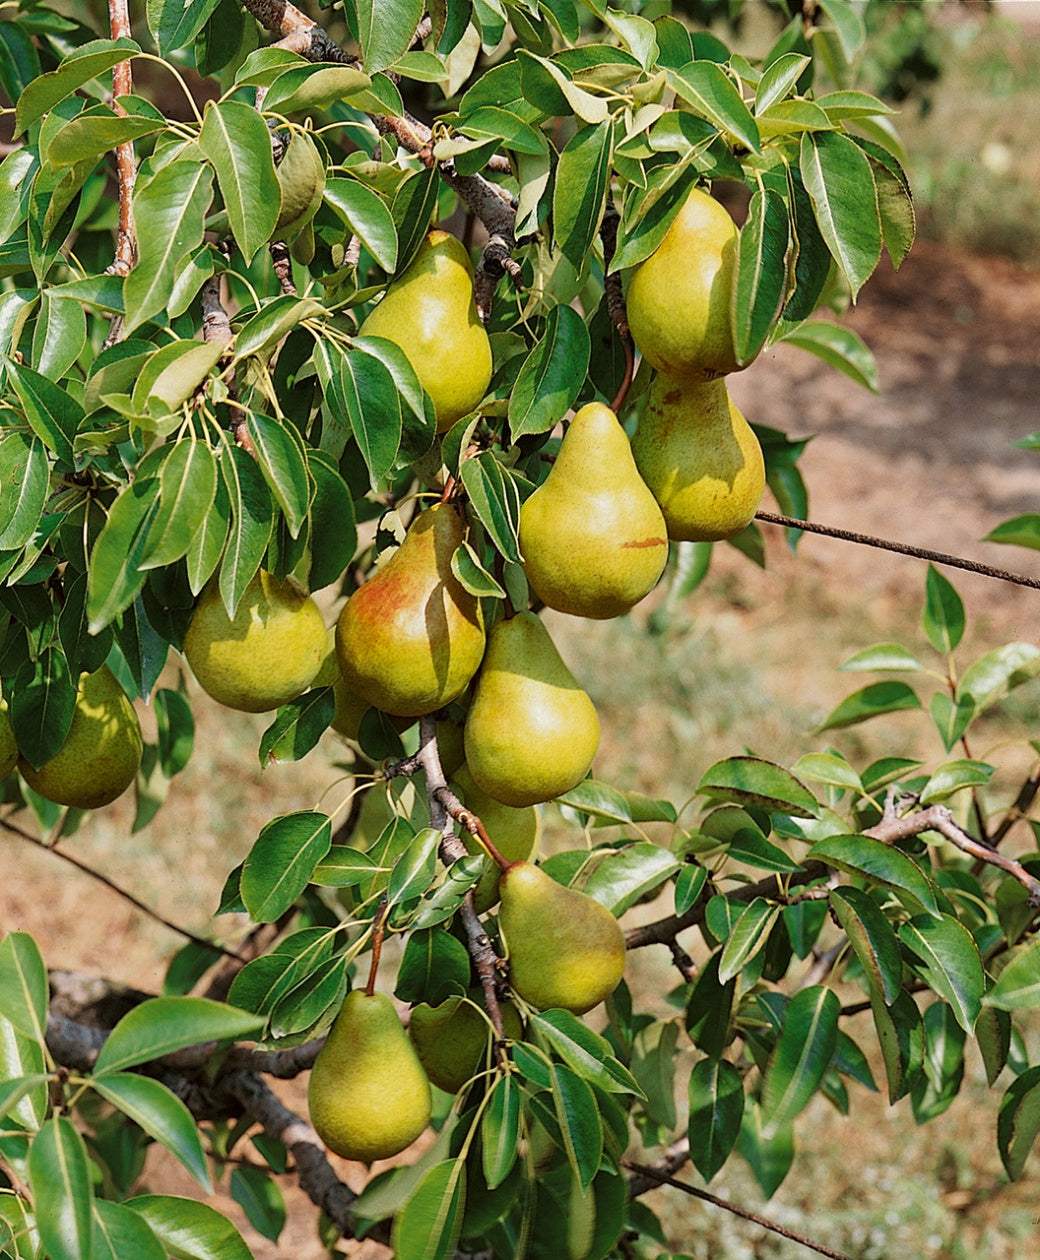 Care Of Bartlett Pear Trees: Tips For Growing Bartlett Pears